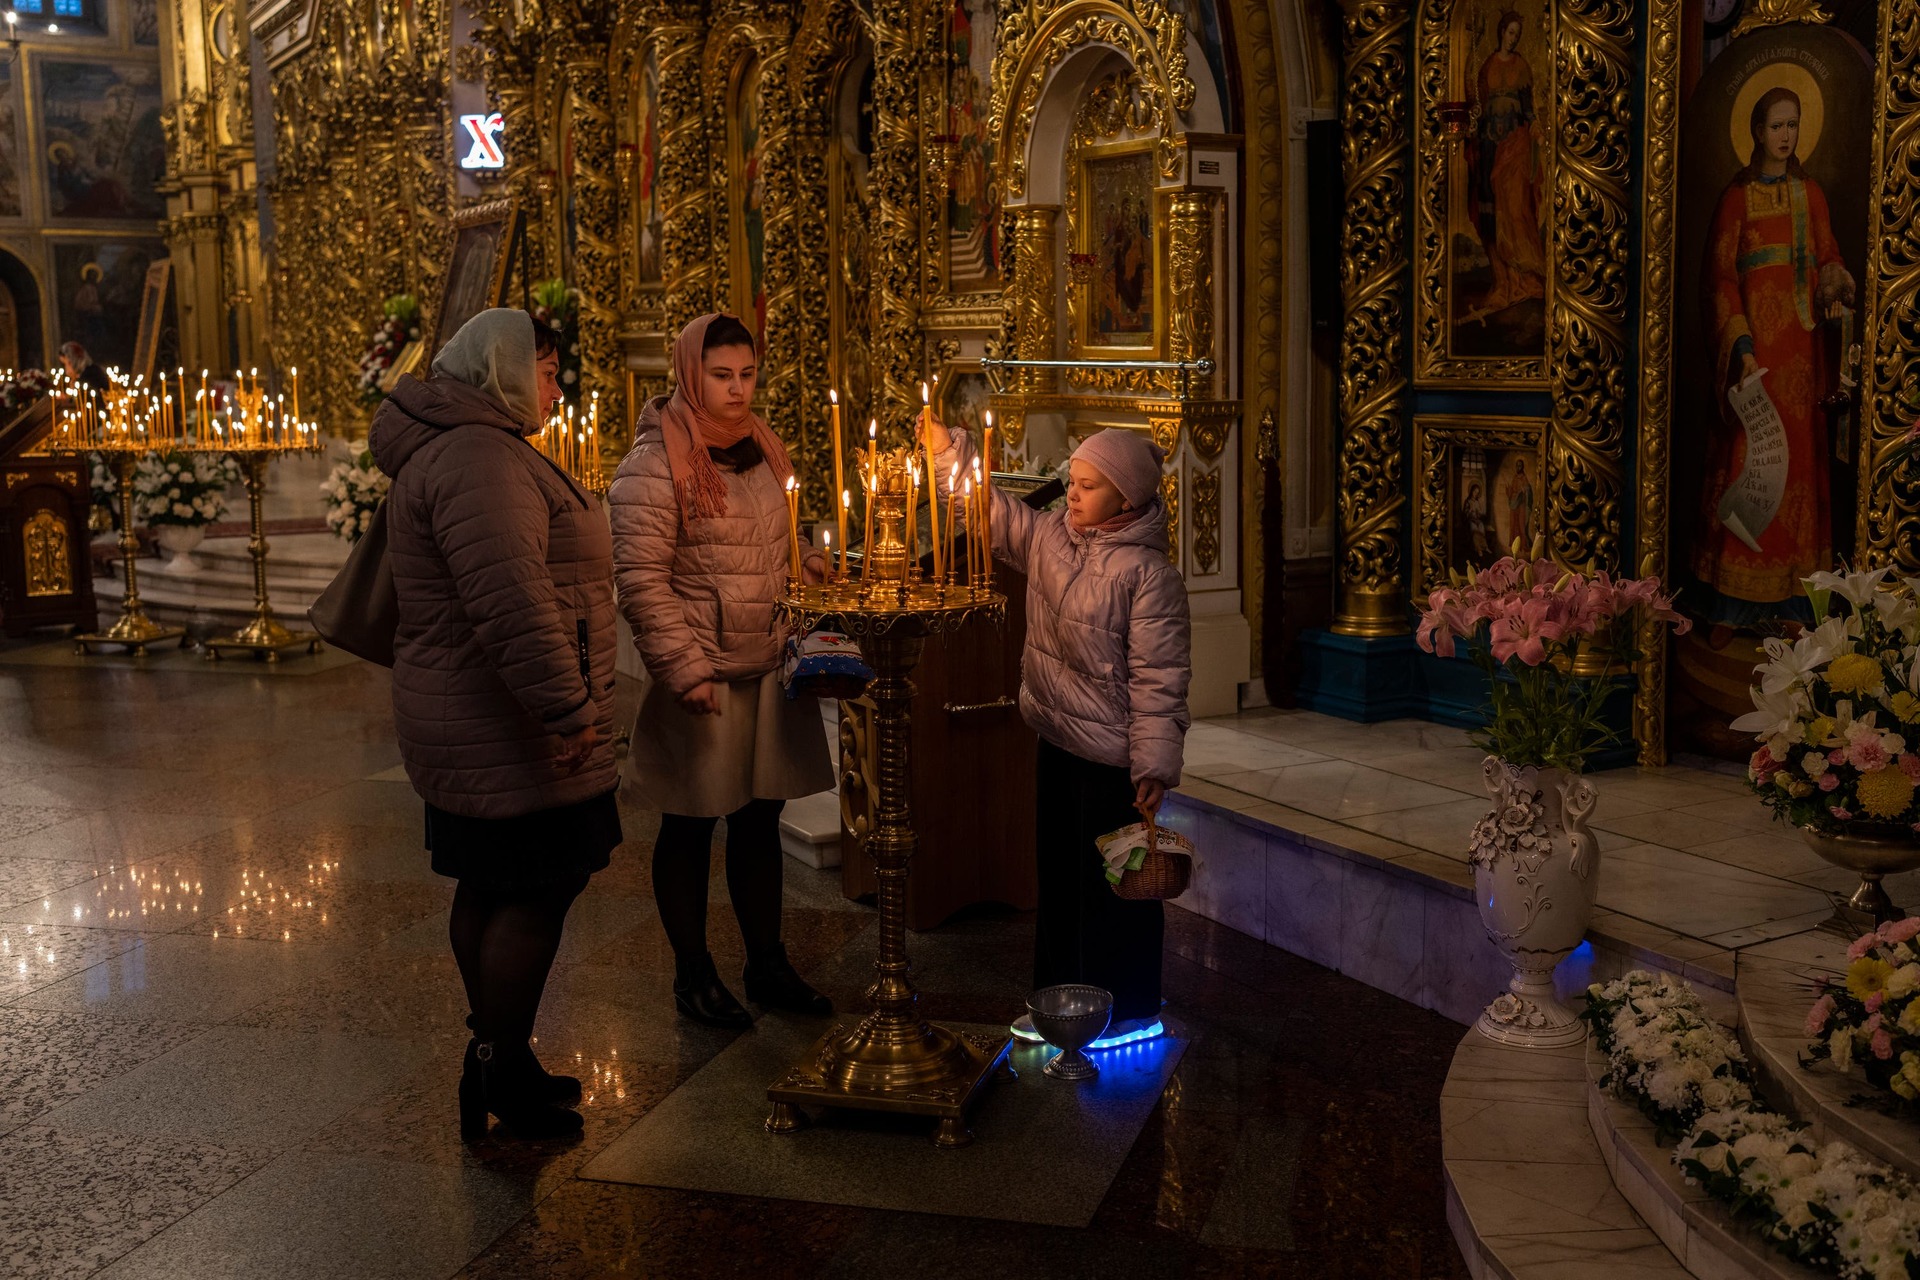 Orthodox Christian worshippers light candles during an Easter Sunday service in Kyiv (Bernat Armangue/AP/PA)